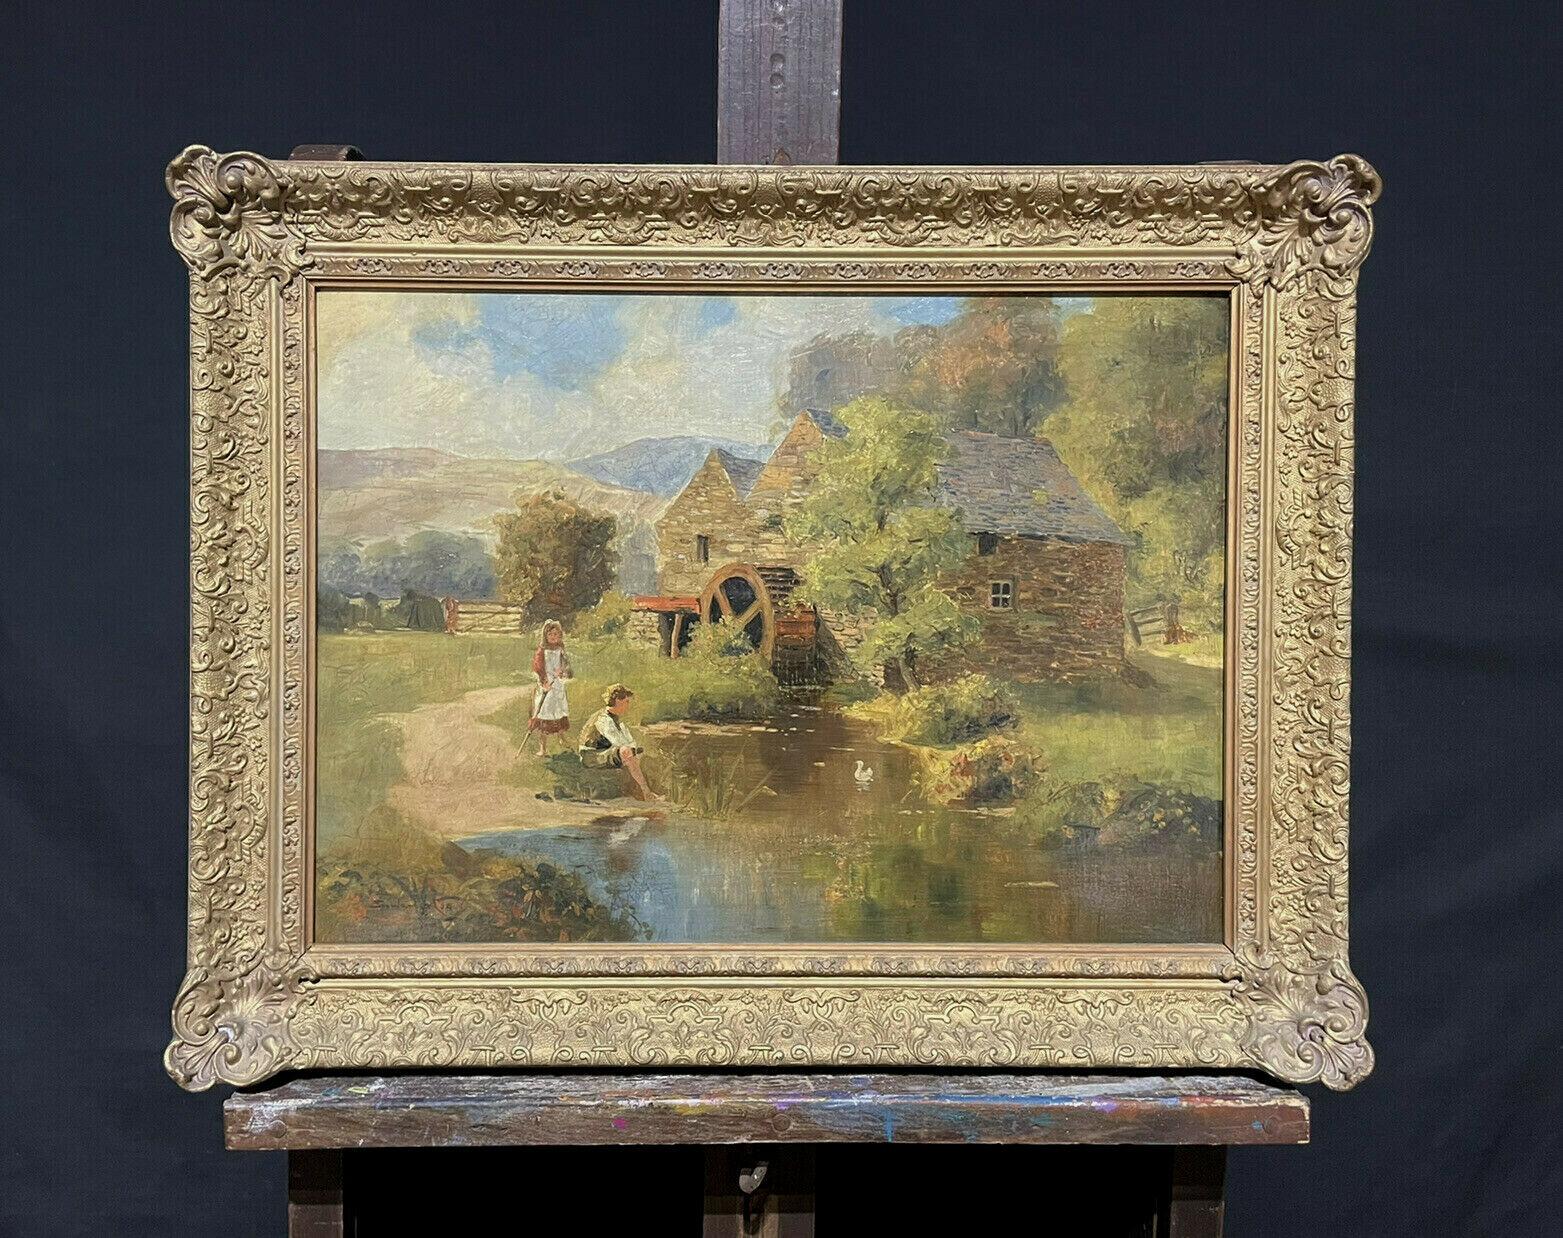 SIGNED VICTORIAN ENGLISH OIL PAINTING - CHILDREN PLAYING WATERMILL STREAM DUCKS - Painting by S. Warburton